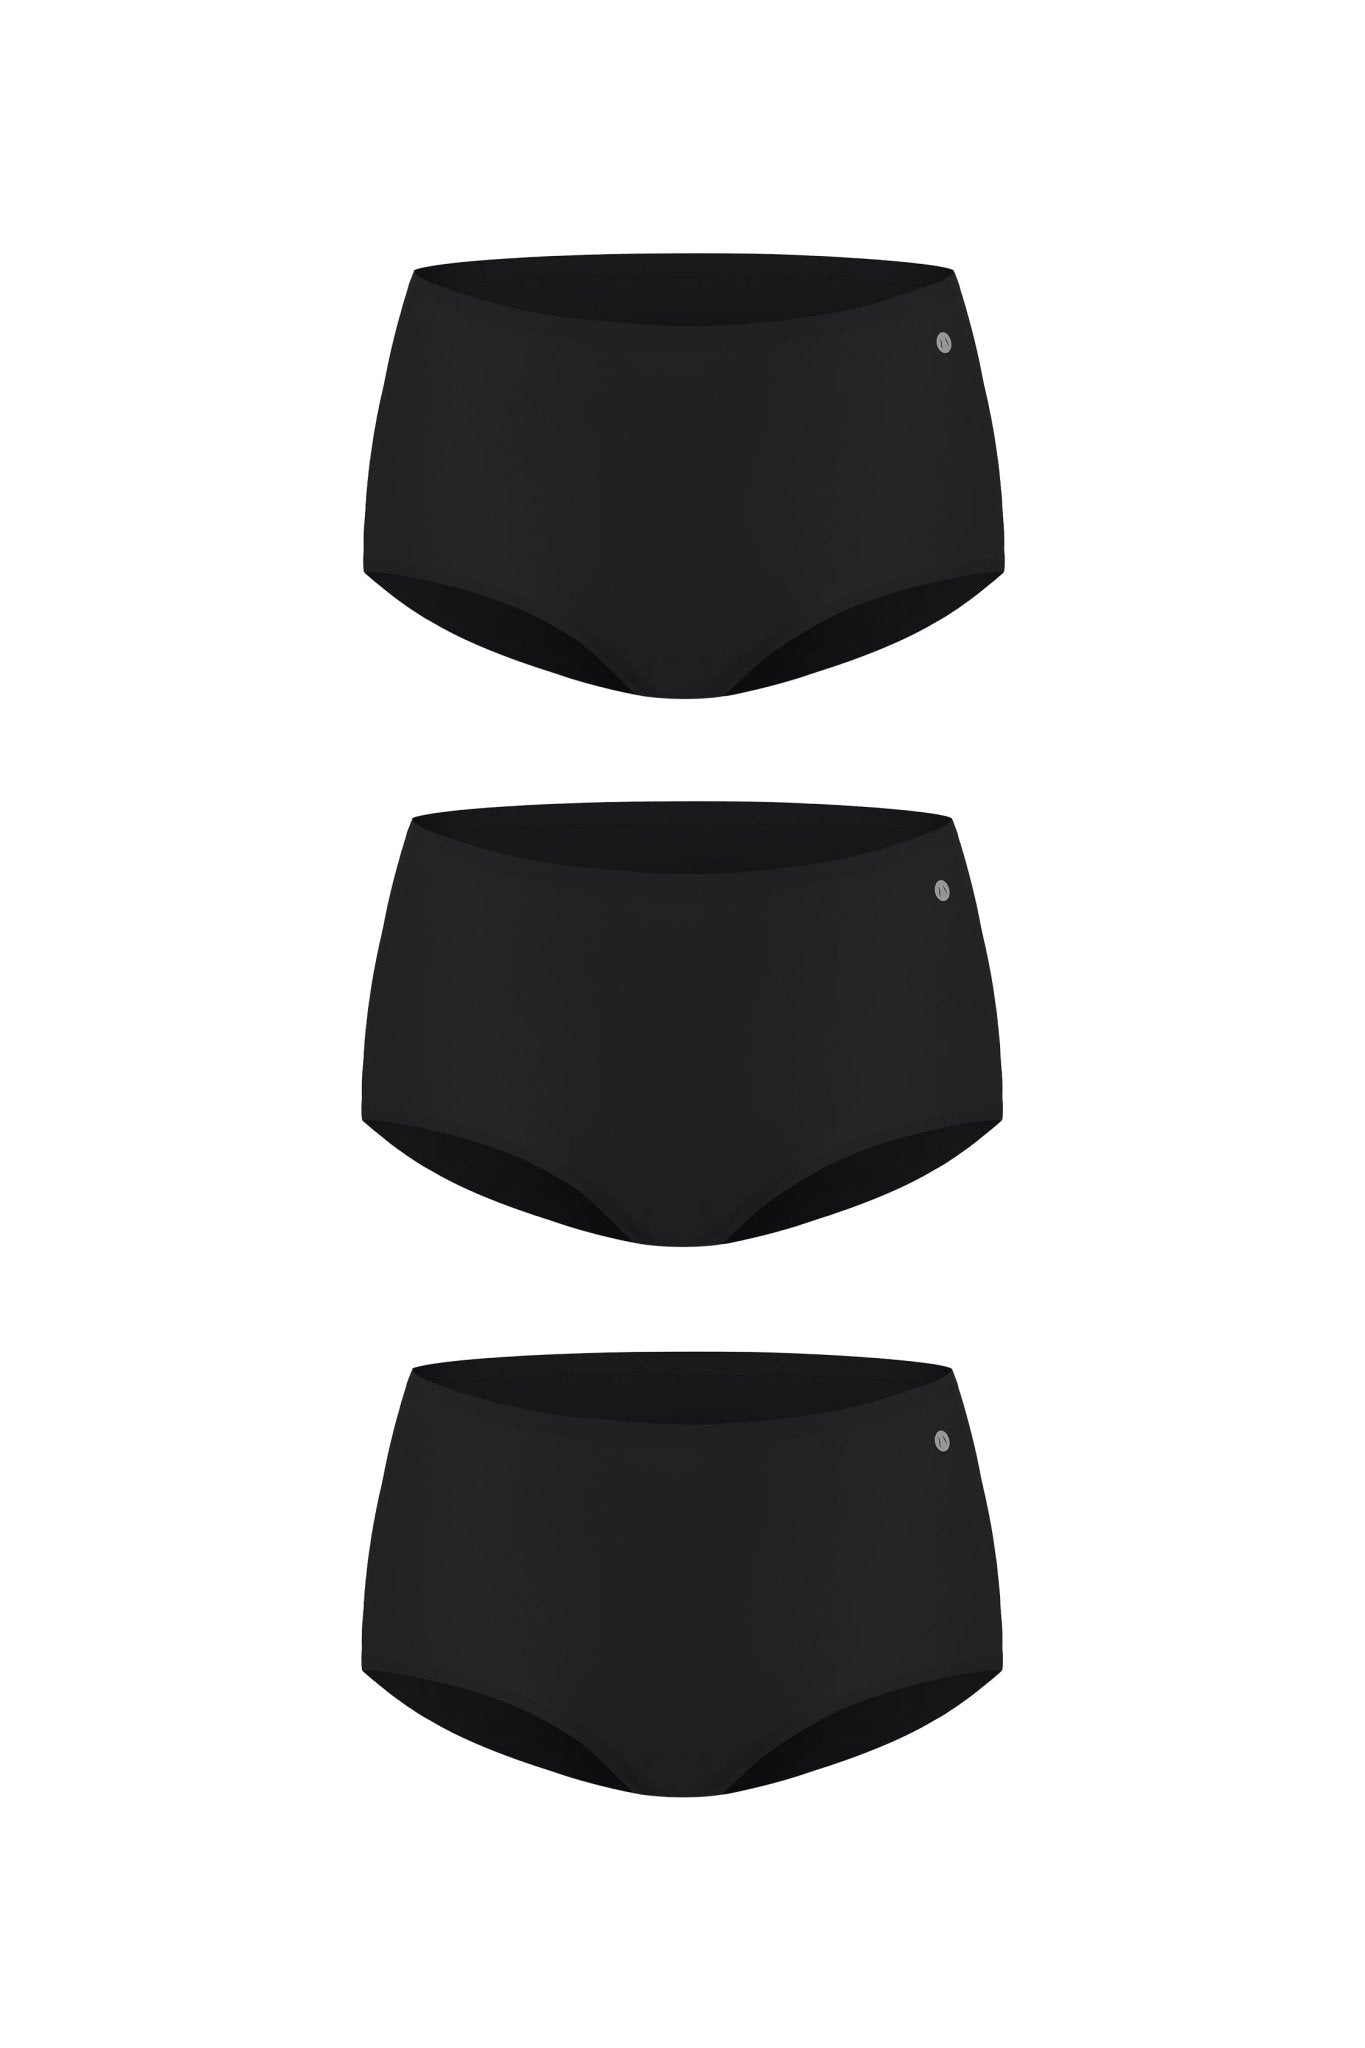 Easy pieces One-Size Briefs 3-PACK - POSESHE